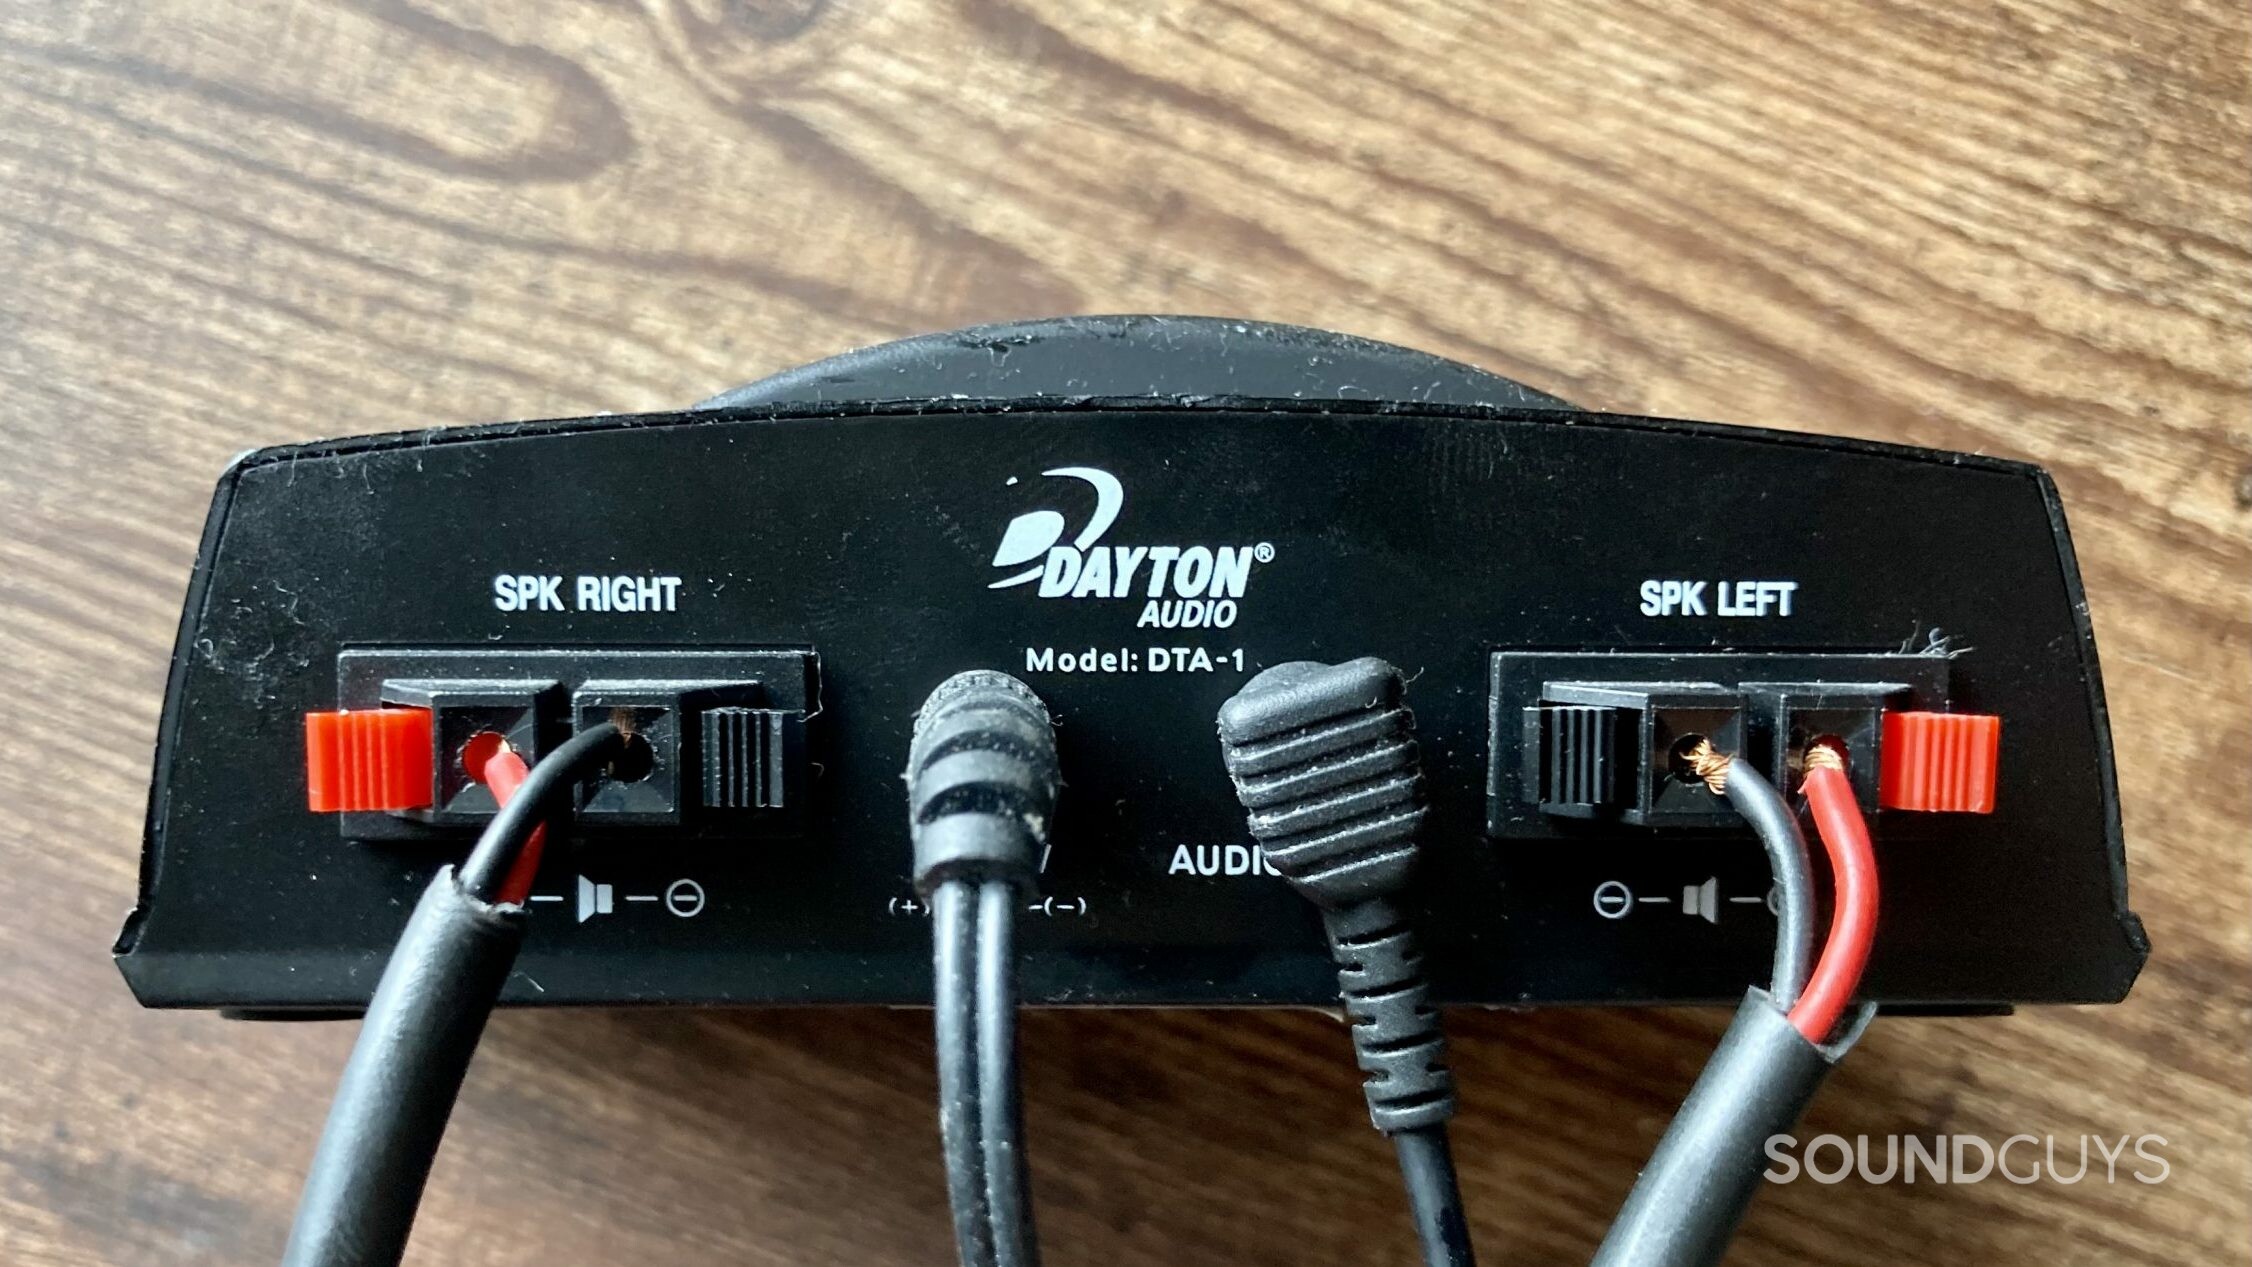 Ensure that all cables are properly connected to the speaker system, including the power cable, audio cables, and any additional connections.
Make sure the audio cables are securely plugged into the correct ports on both the speakers and the audio source (e.g., computer, TV).